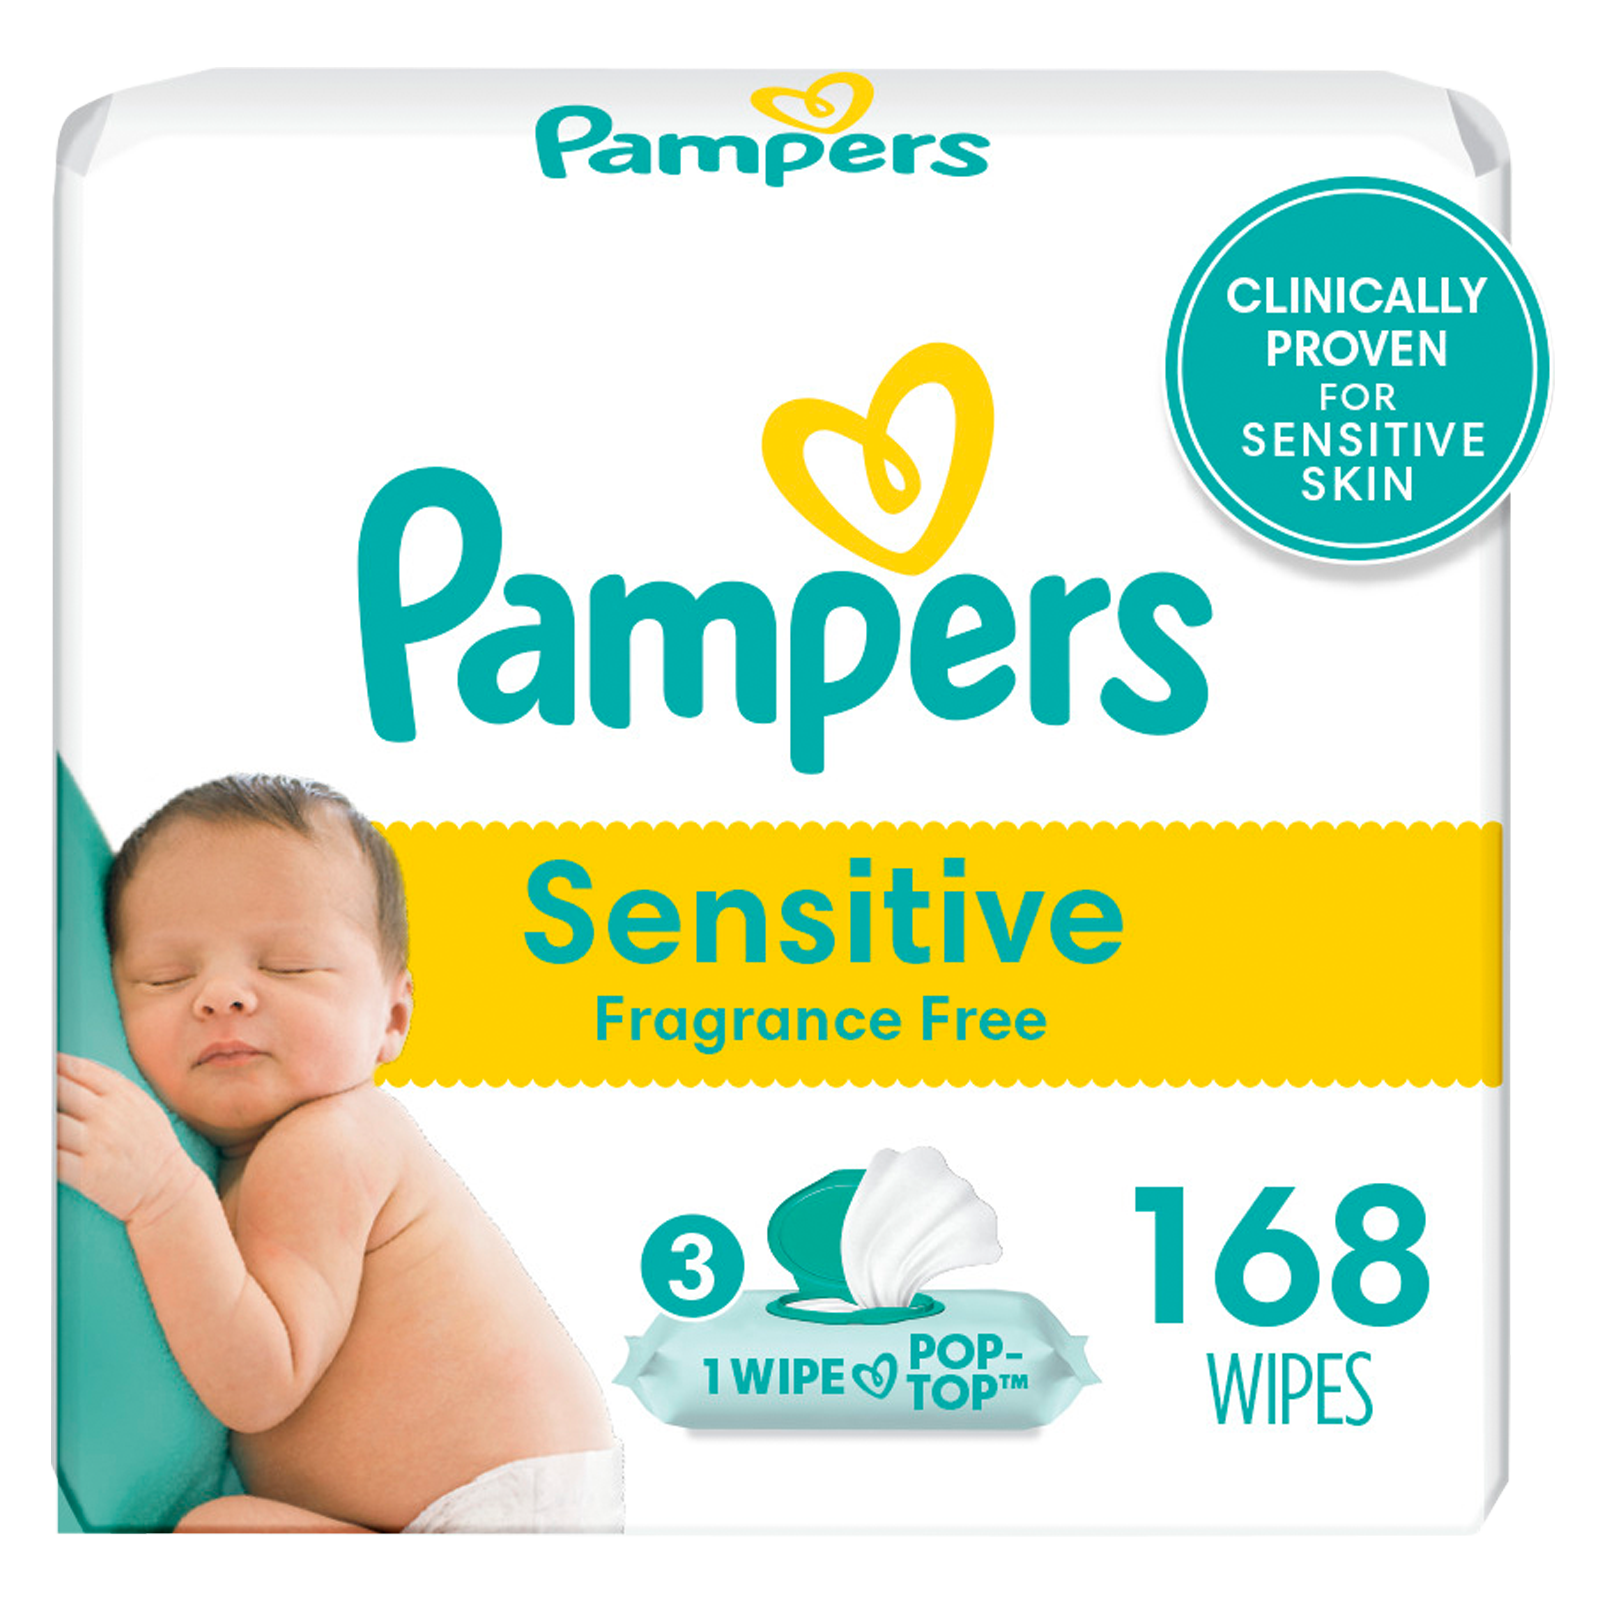 Pampers Sensitive Fragrance Free Baby Wipes 3X Pop-Top 168ct 3pk